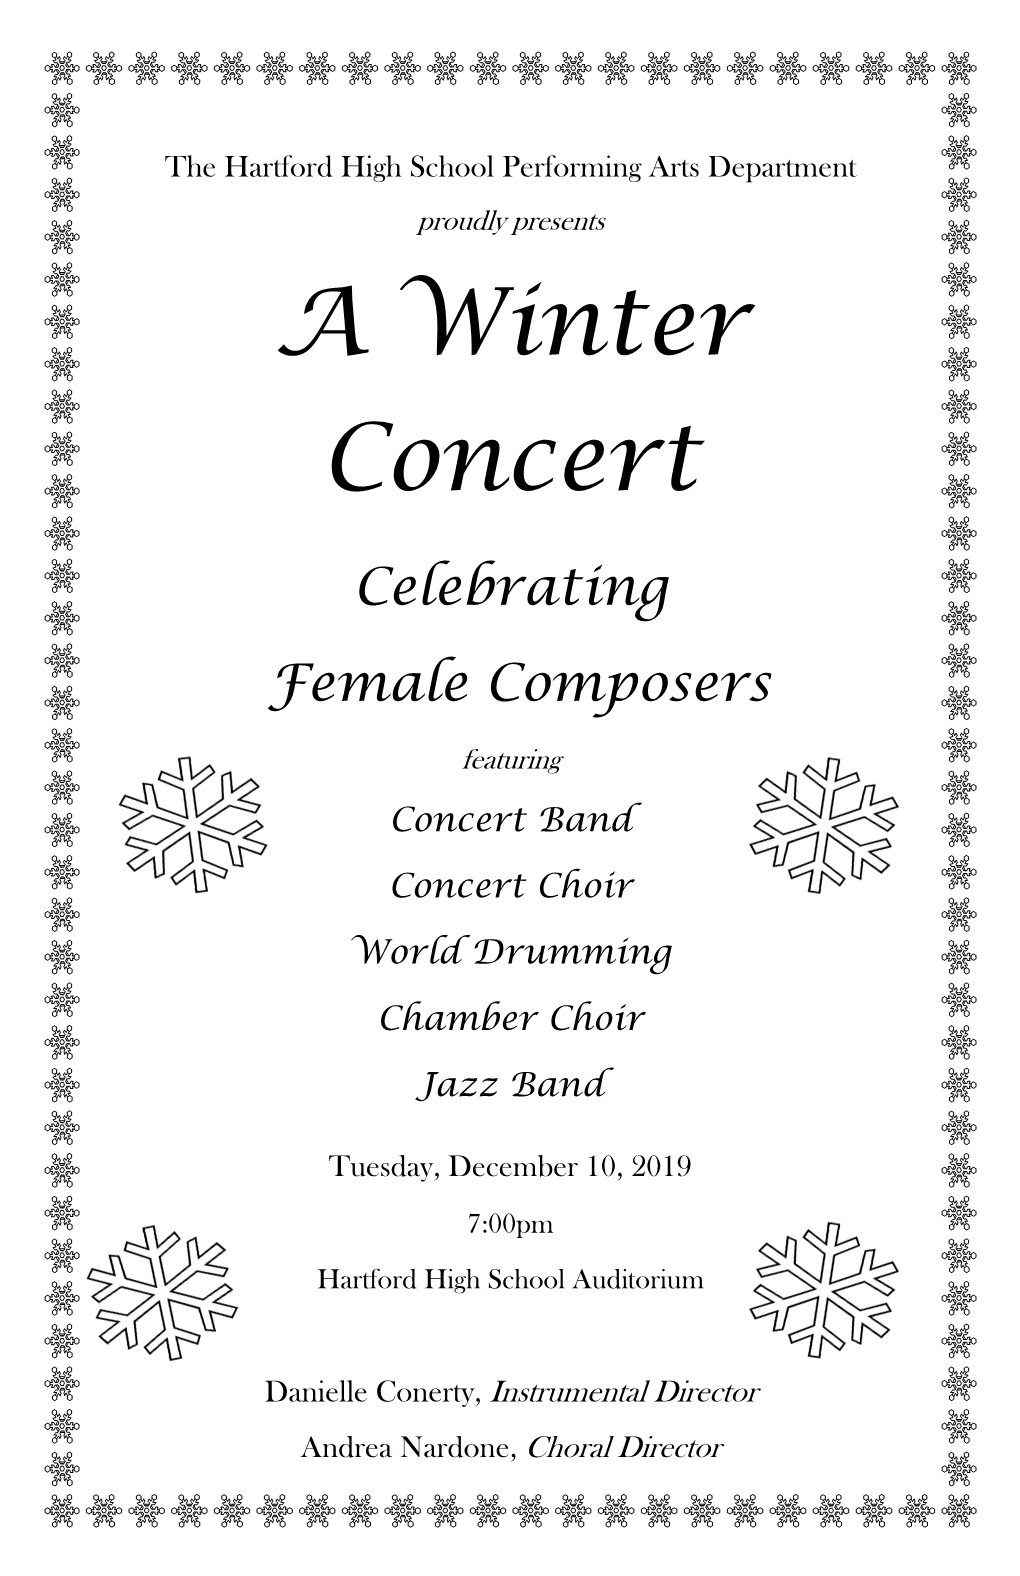 A Winter Concert Celebrating Female Composers Featuring